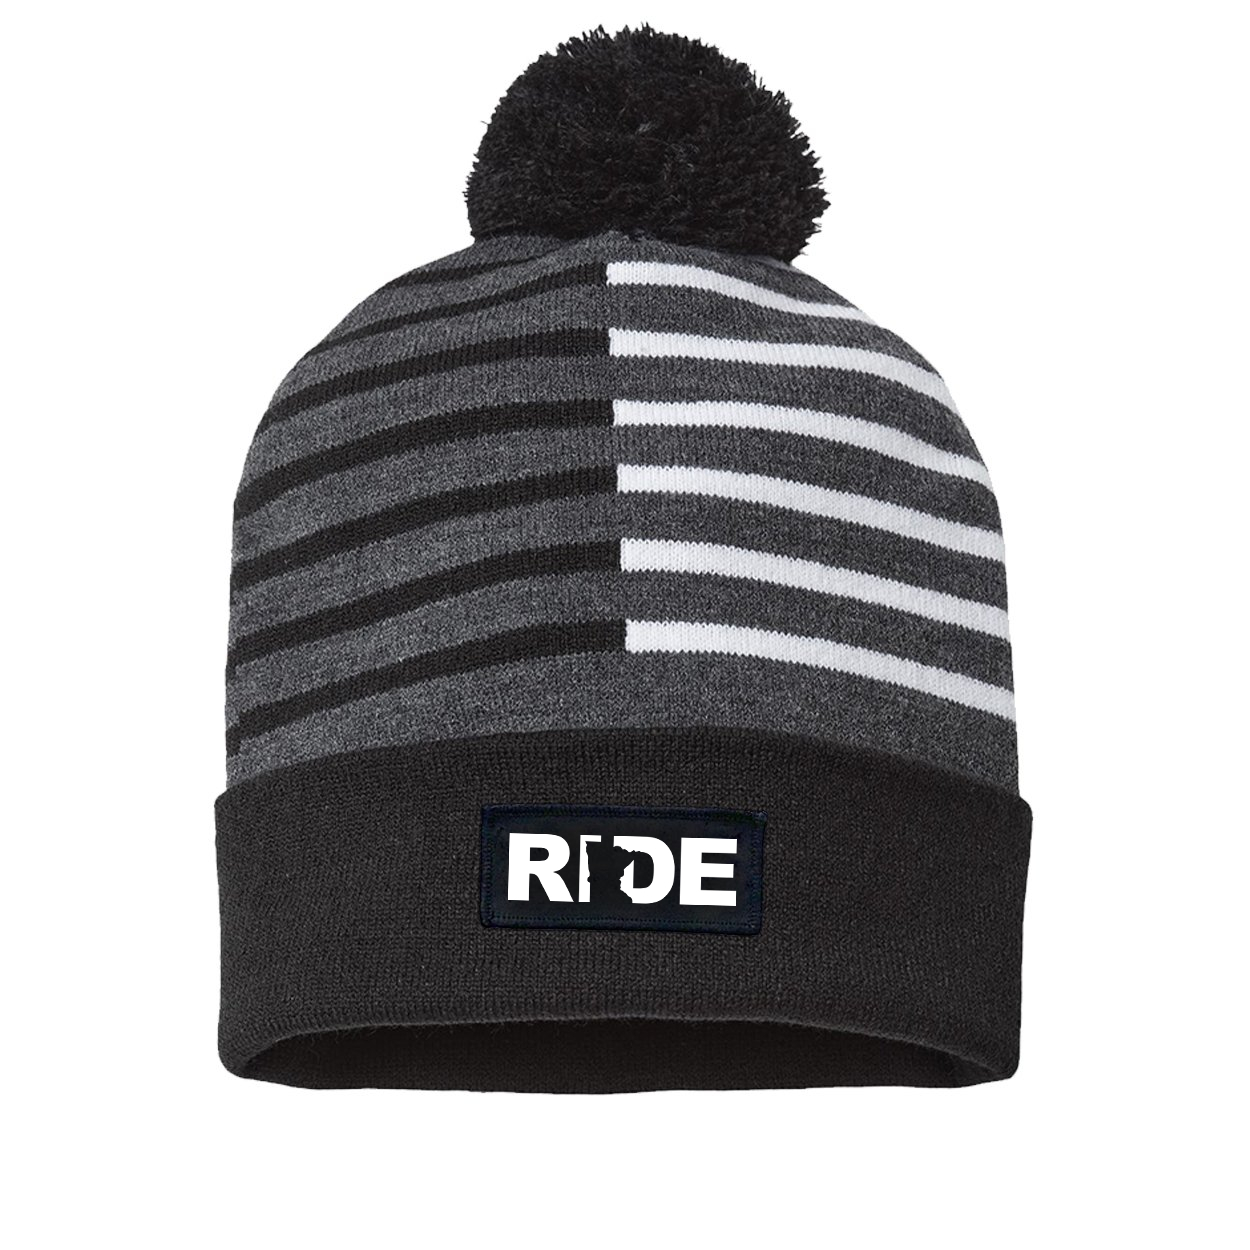 Ride Minnesota Night Out Woven Patch Roll Up Pom Knit Beanie Half Color Black/White (White Logo)